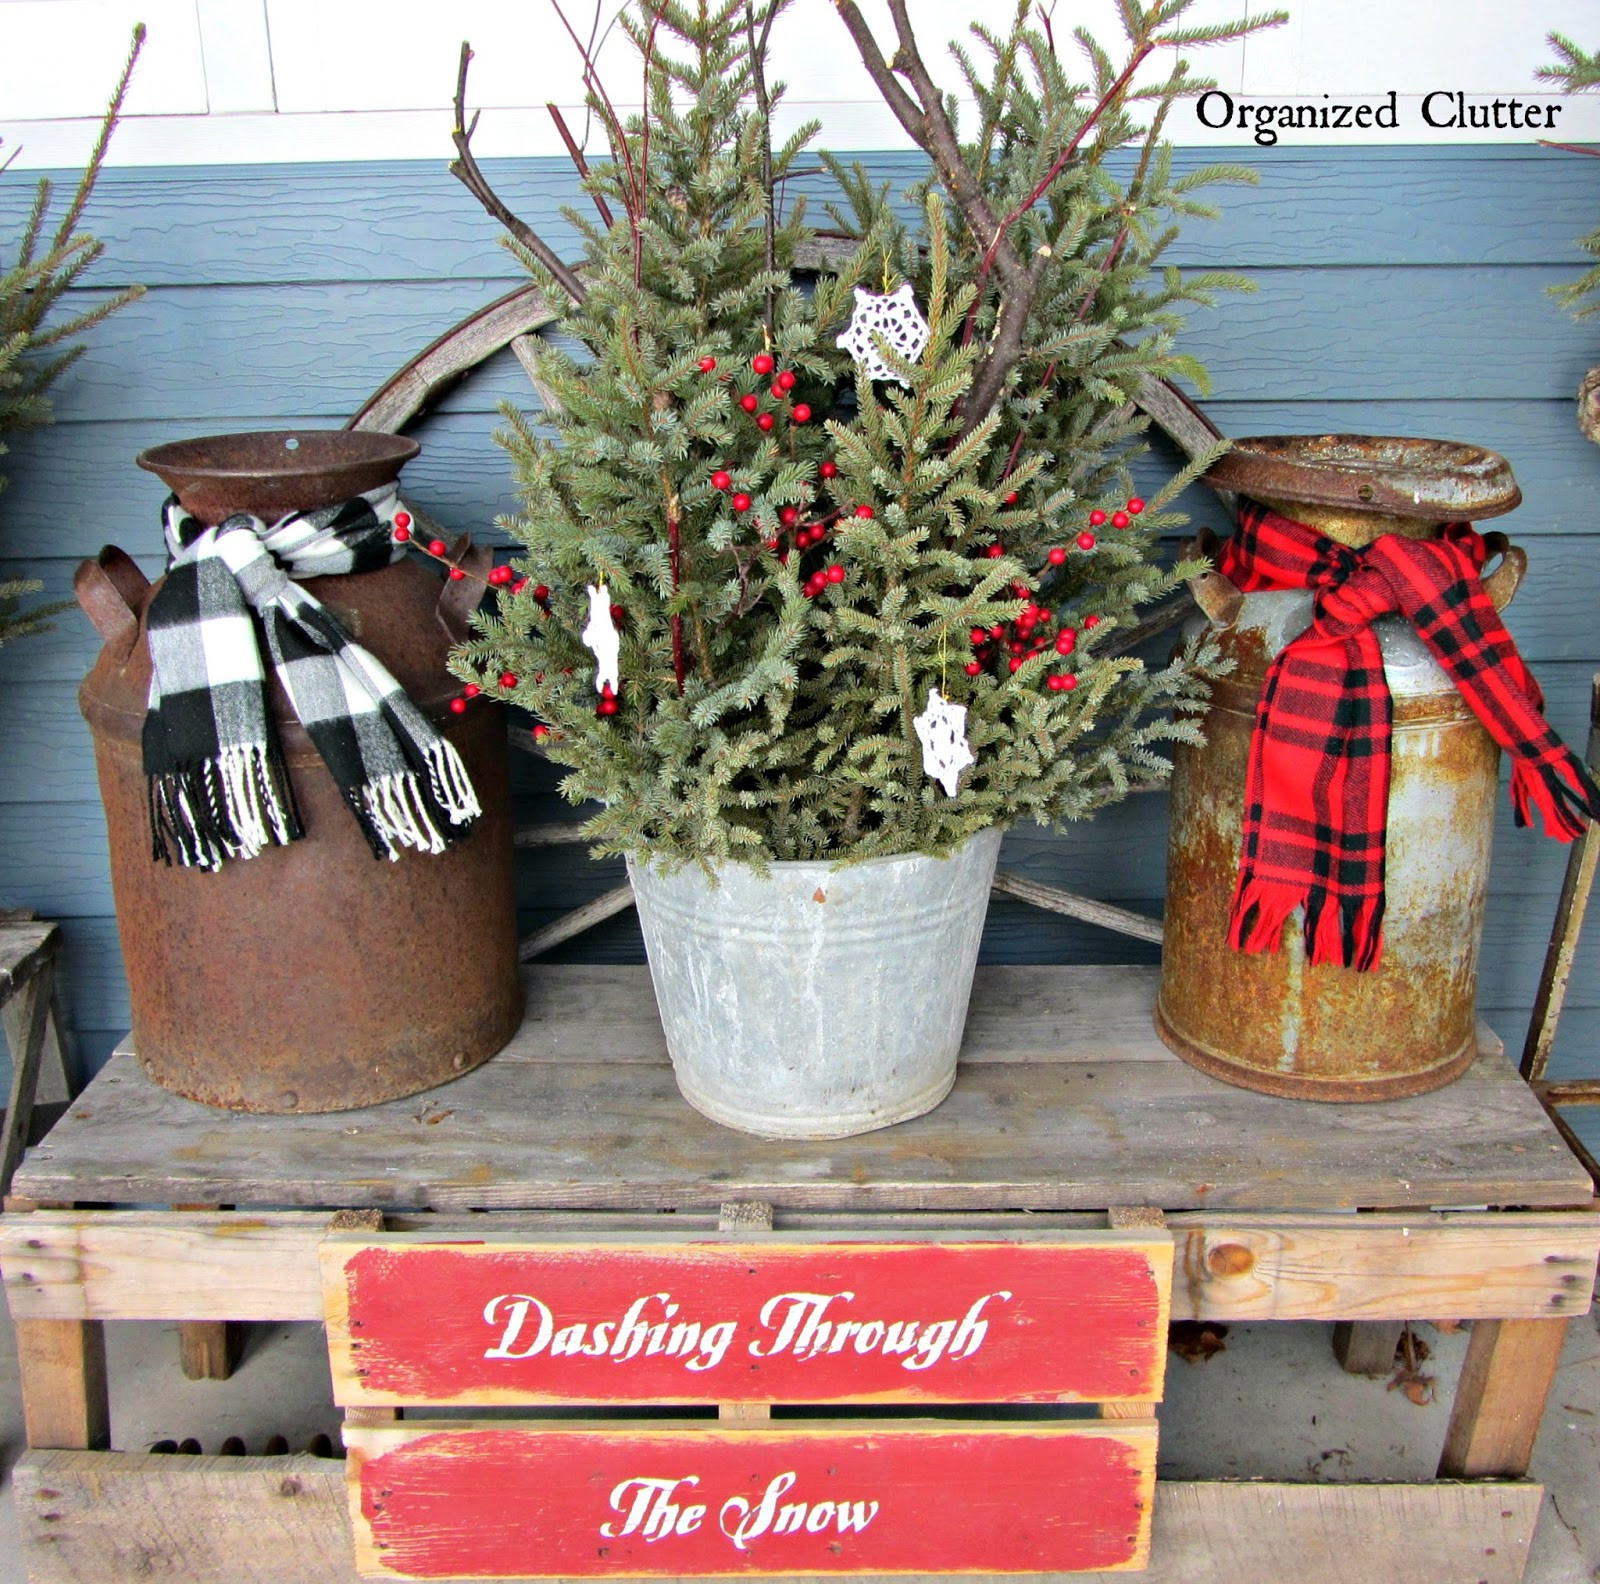 Outdoor Hanging Christmas Decorations
 JUNKERS UNITE With An Outdoor Rustic Christmas Vignette